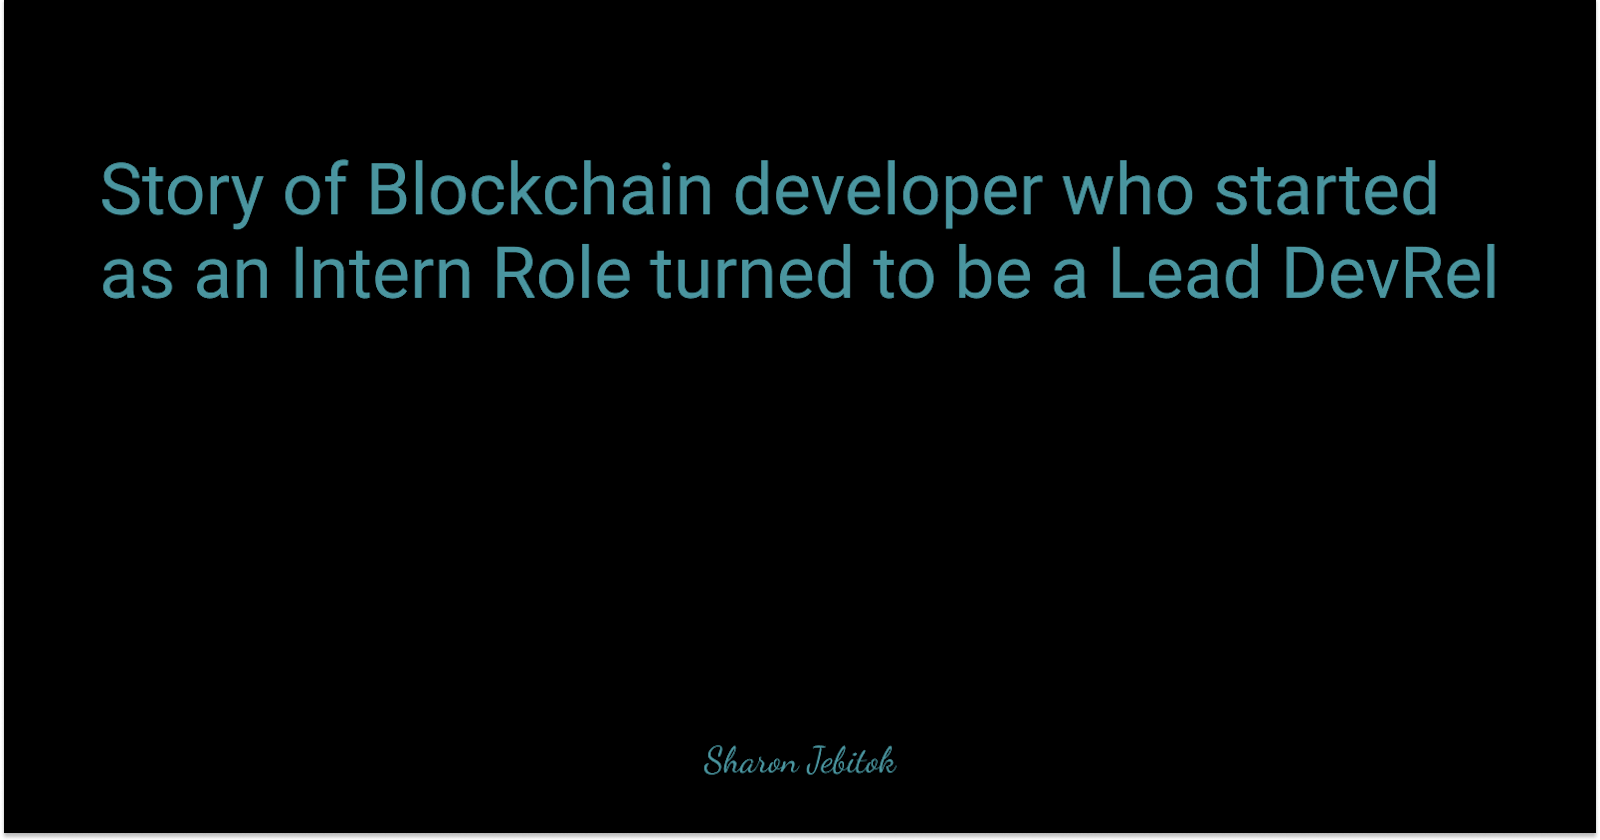 Story of Blockchain developer who started as an Intern Role turned to be a Lead DevRel